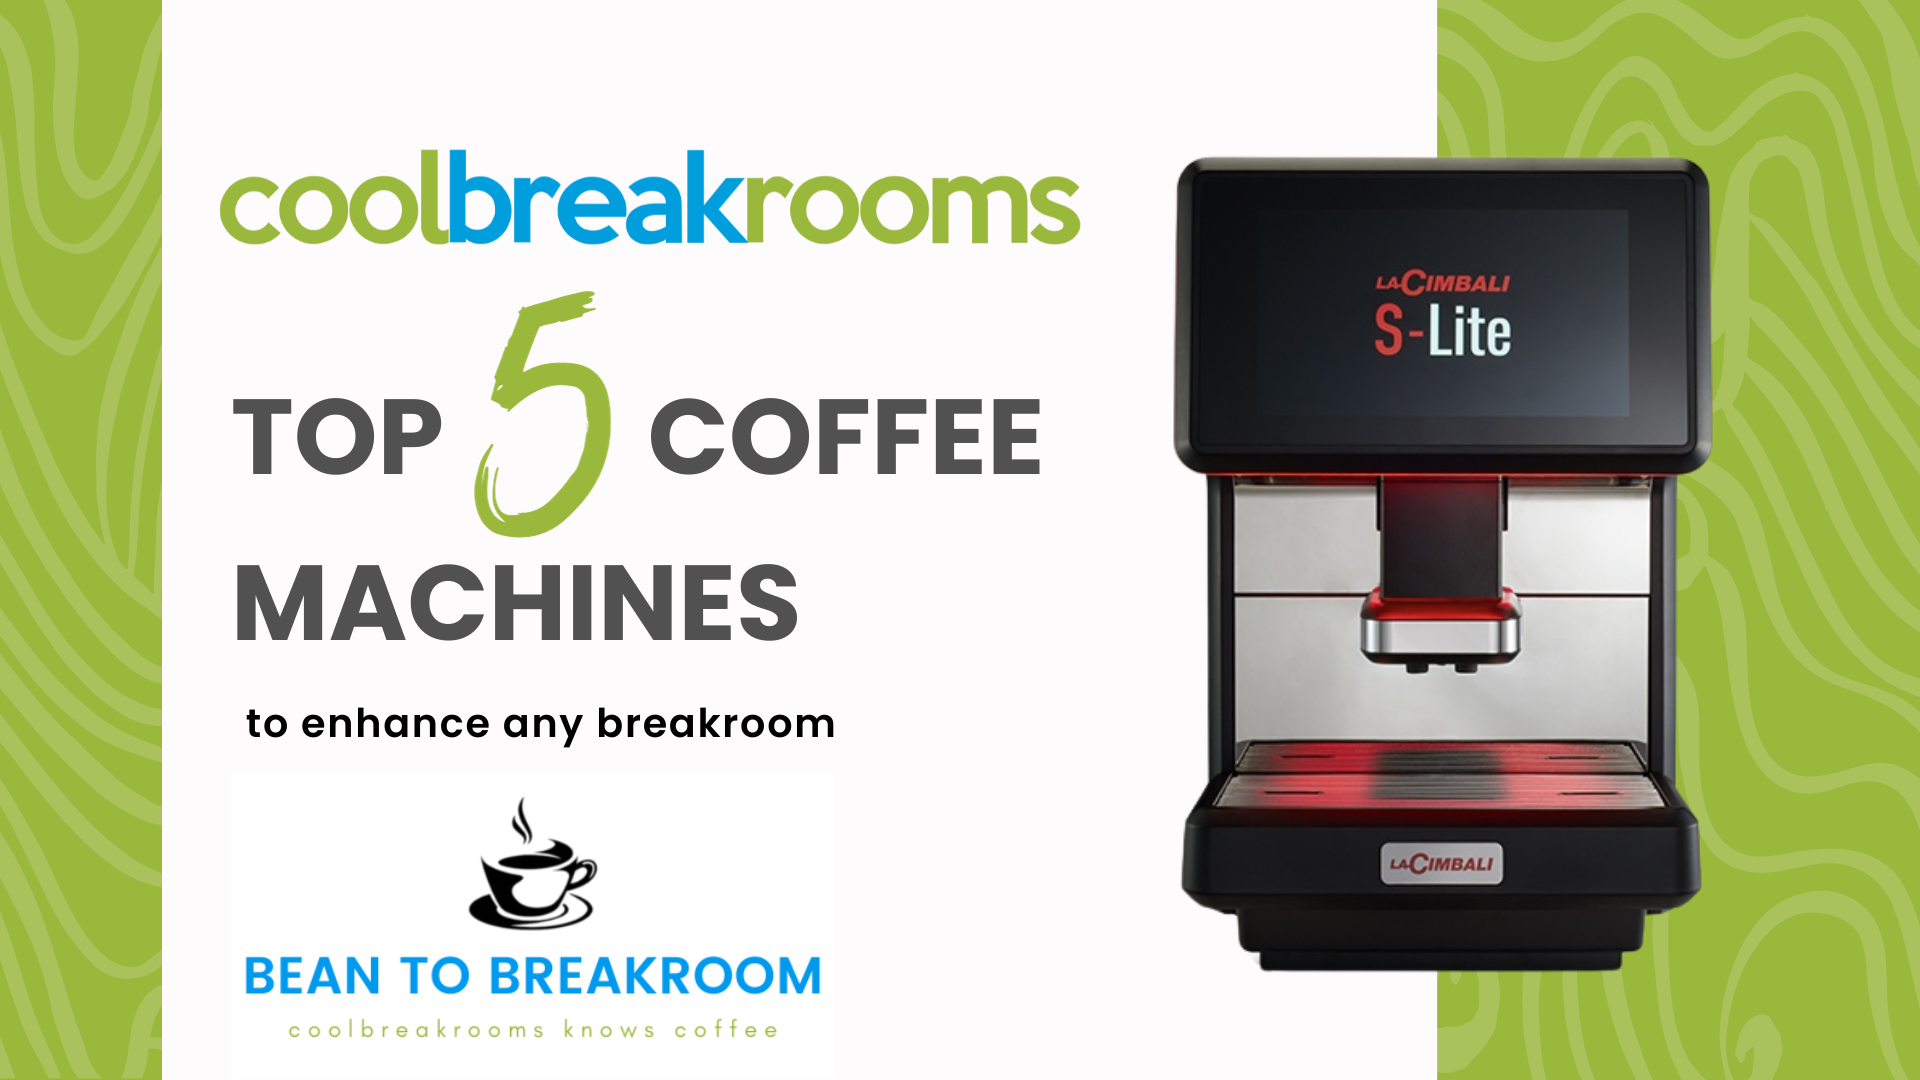 Top 5 Coffee Machines to Enhance any Breakroom